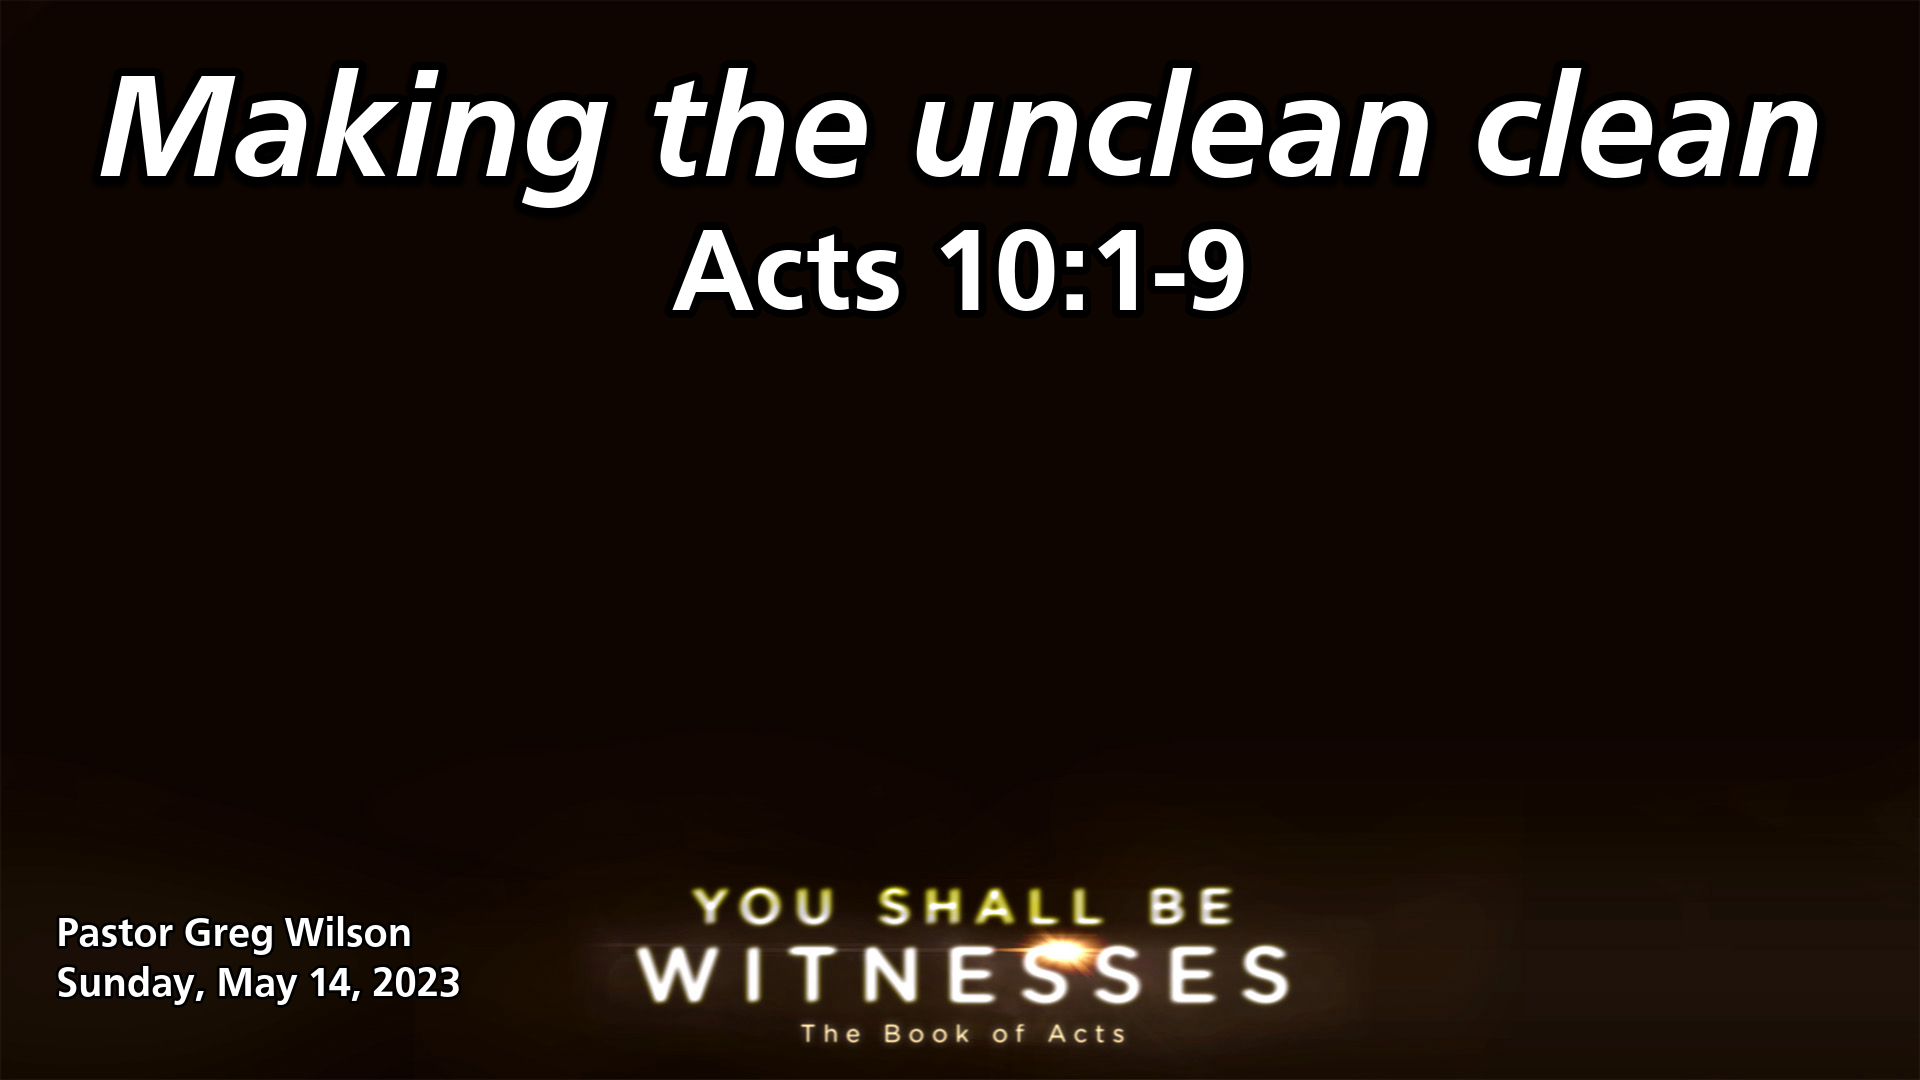 "Making the unclean clean"